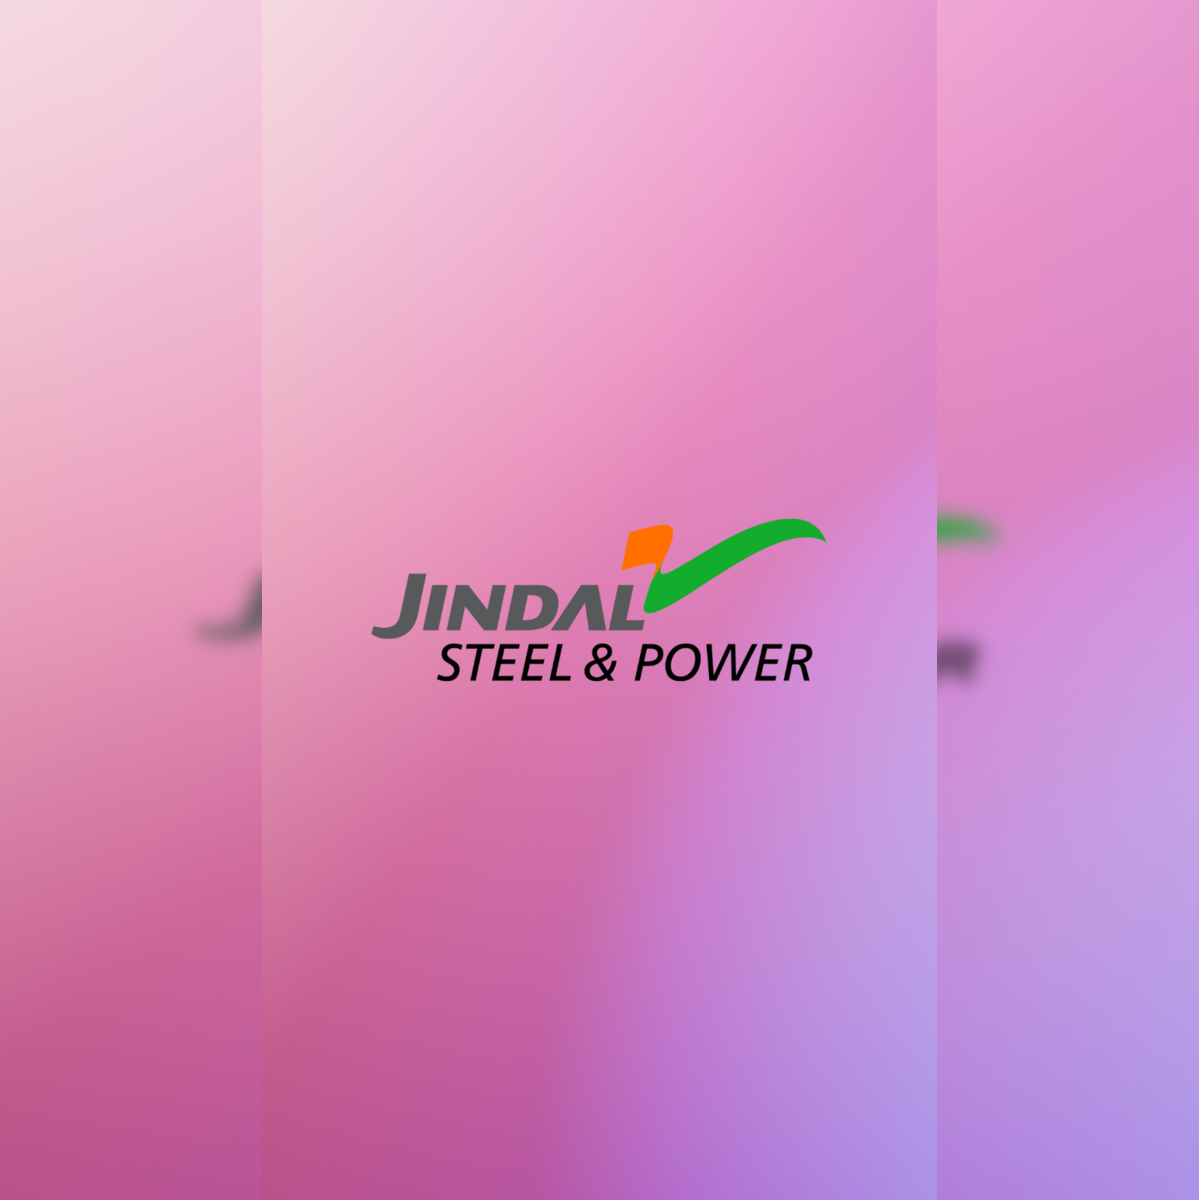 Merger of Two Jindal Steel Conglomerates Reaches another Big Milestone